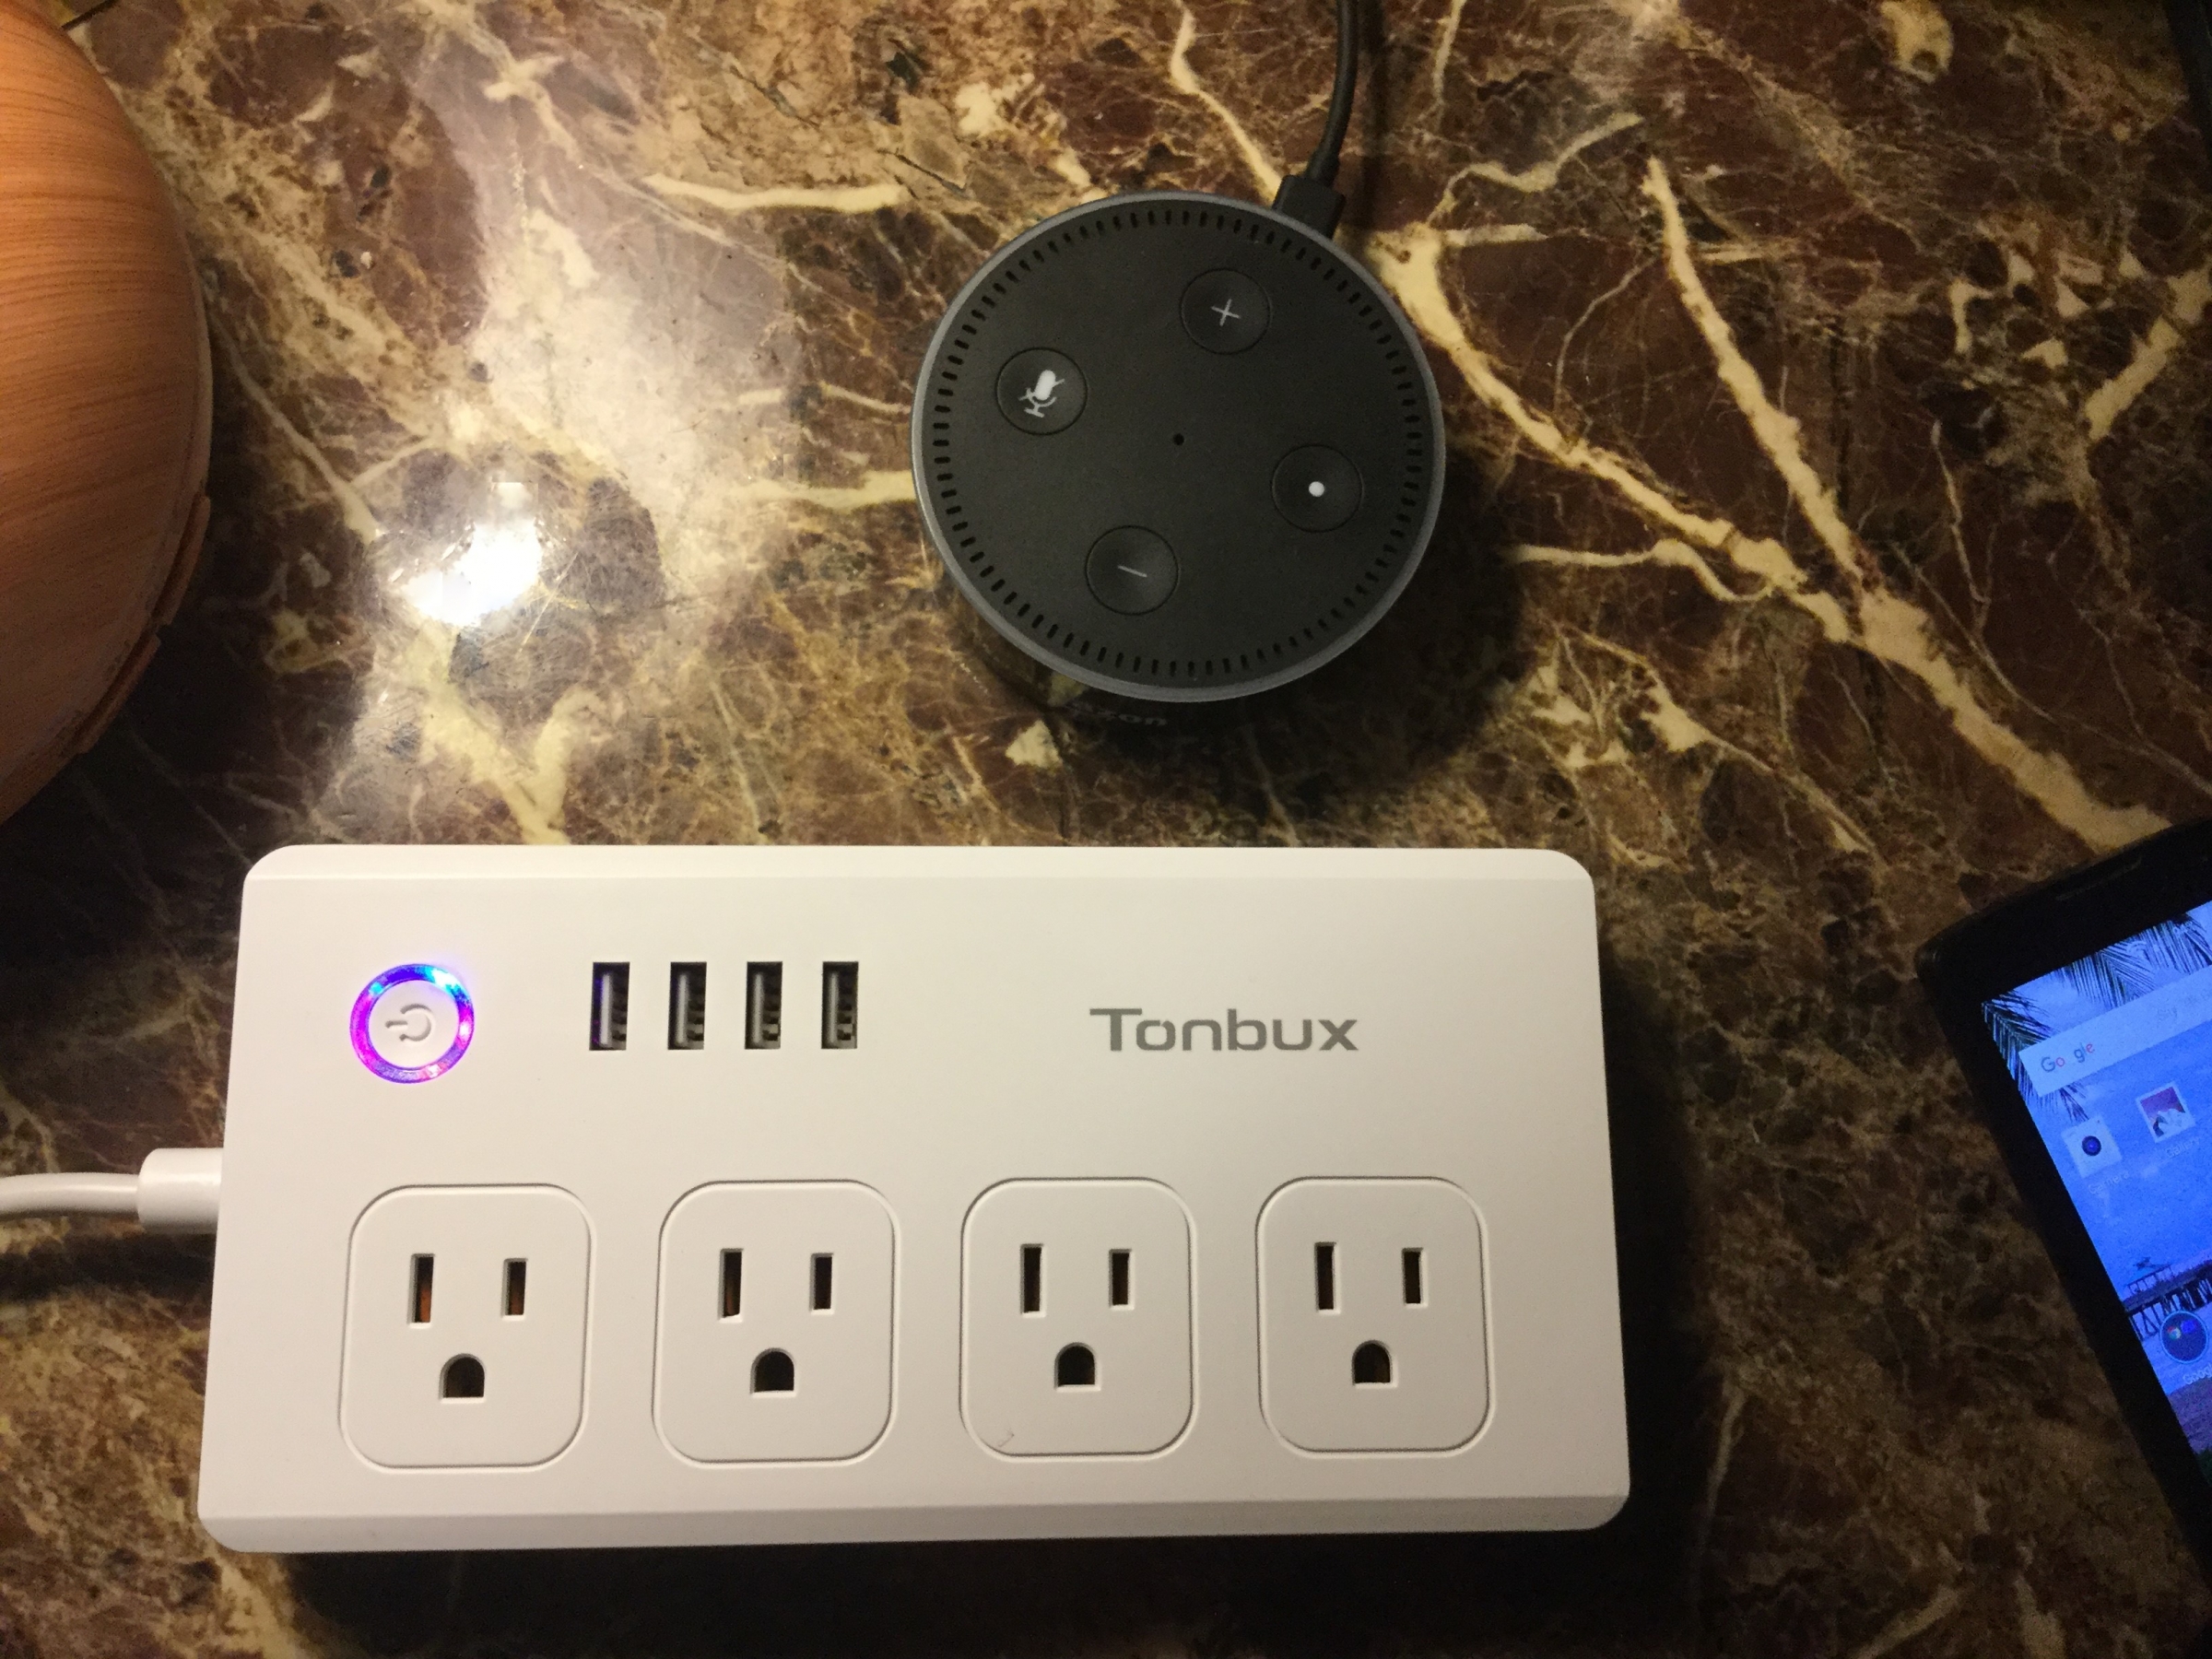 Voice control for my kitchen